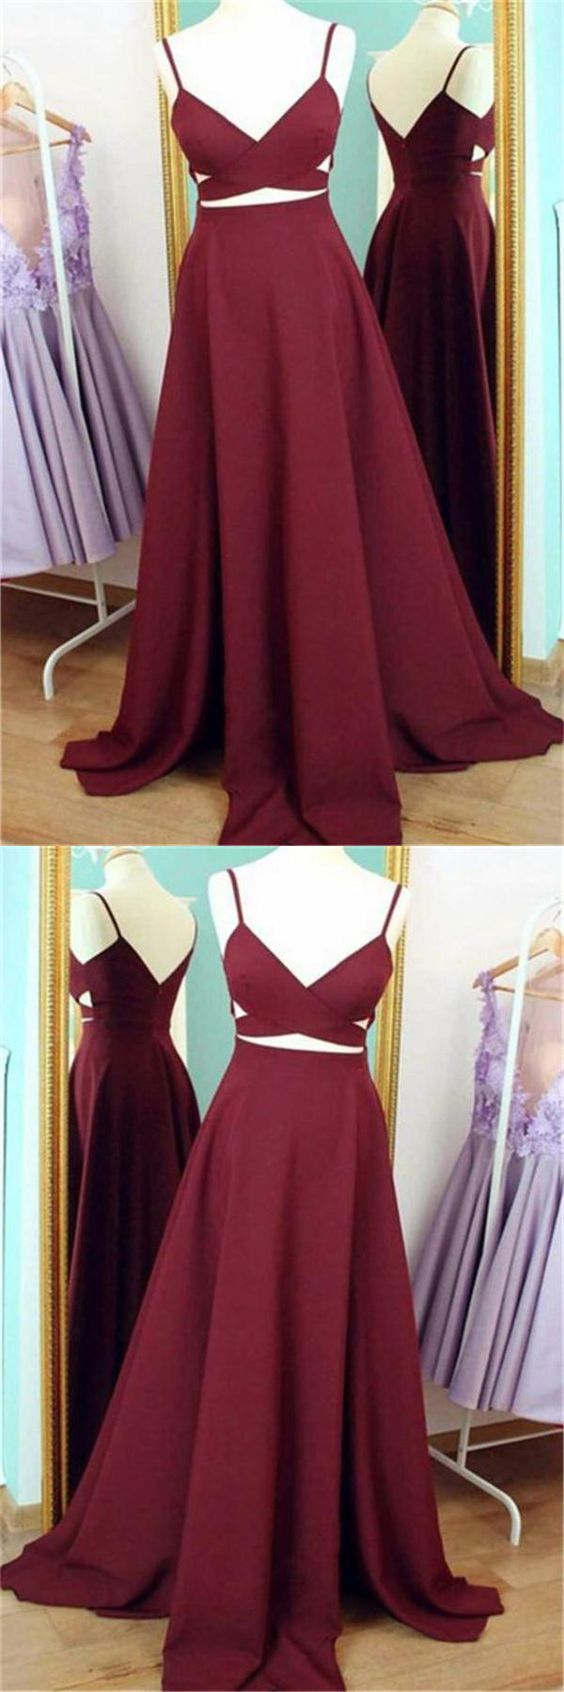 Spaghetti Straps Prom Dress, Long A-line Party Dress ,open Back Simple Prom Dresses